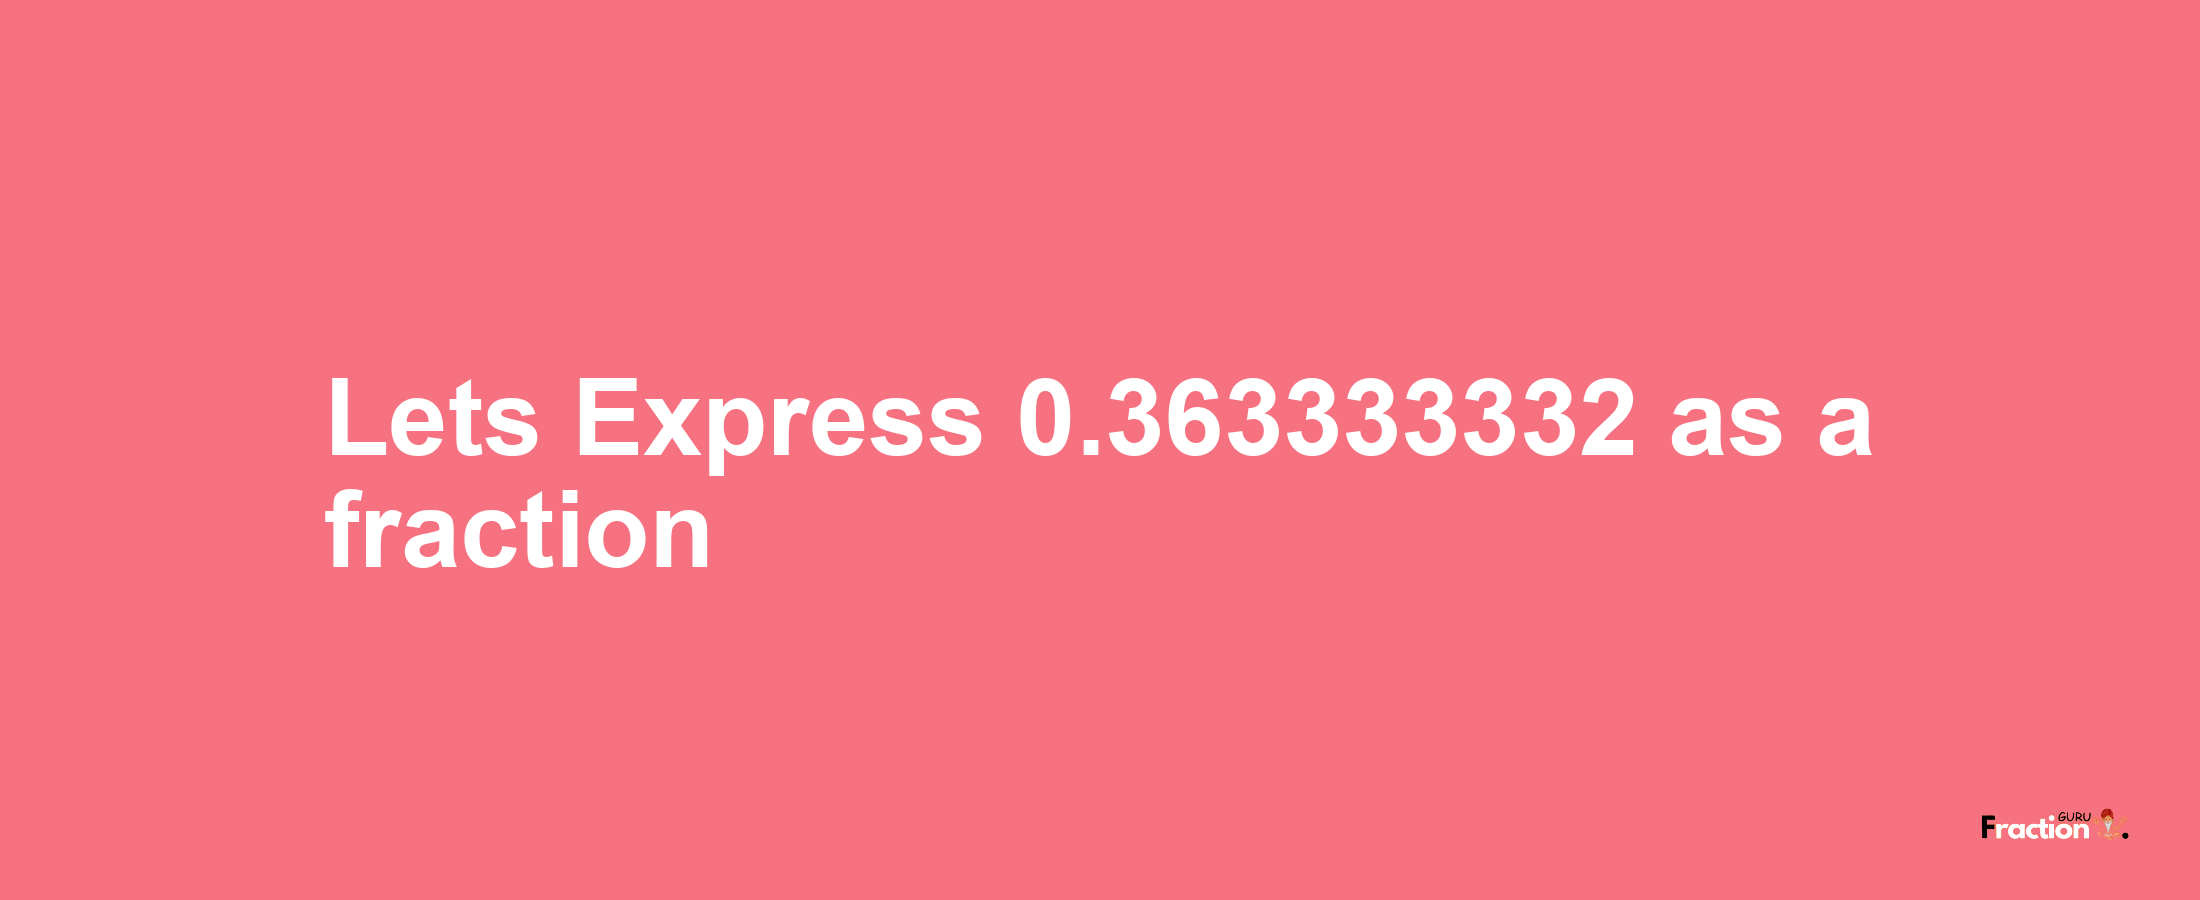 Lets Express 0.363333332 as afraction